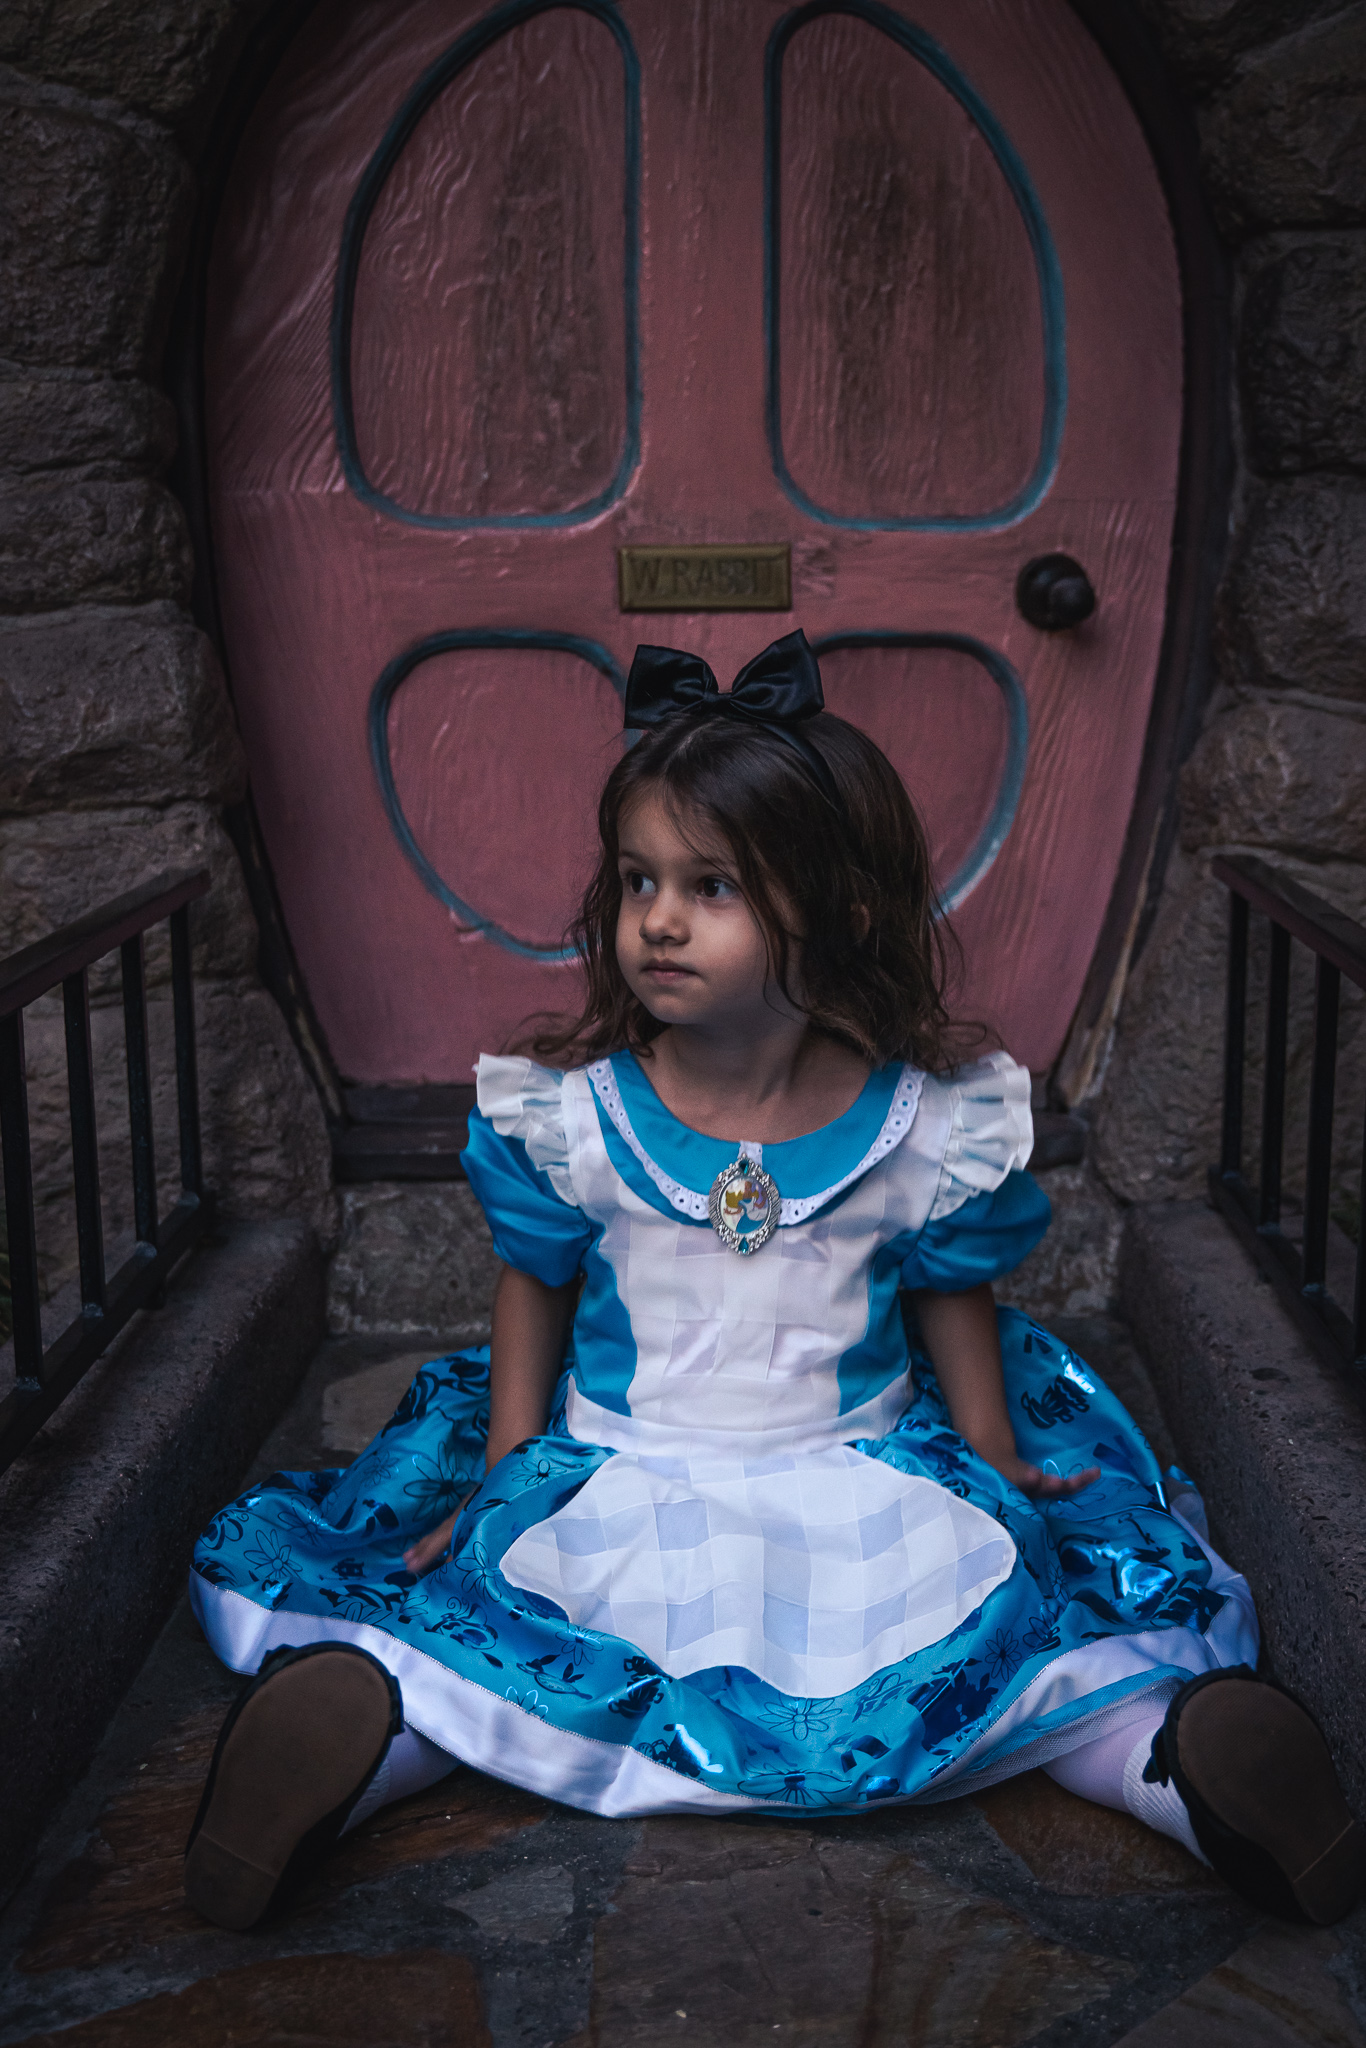 A small girl dressed at Alice in Wonderland sits outside of the White Rabbits Home in Fantasyland at Disneyland in Anaheim, California